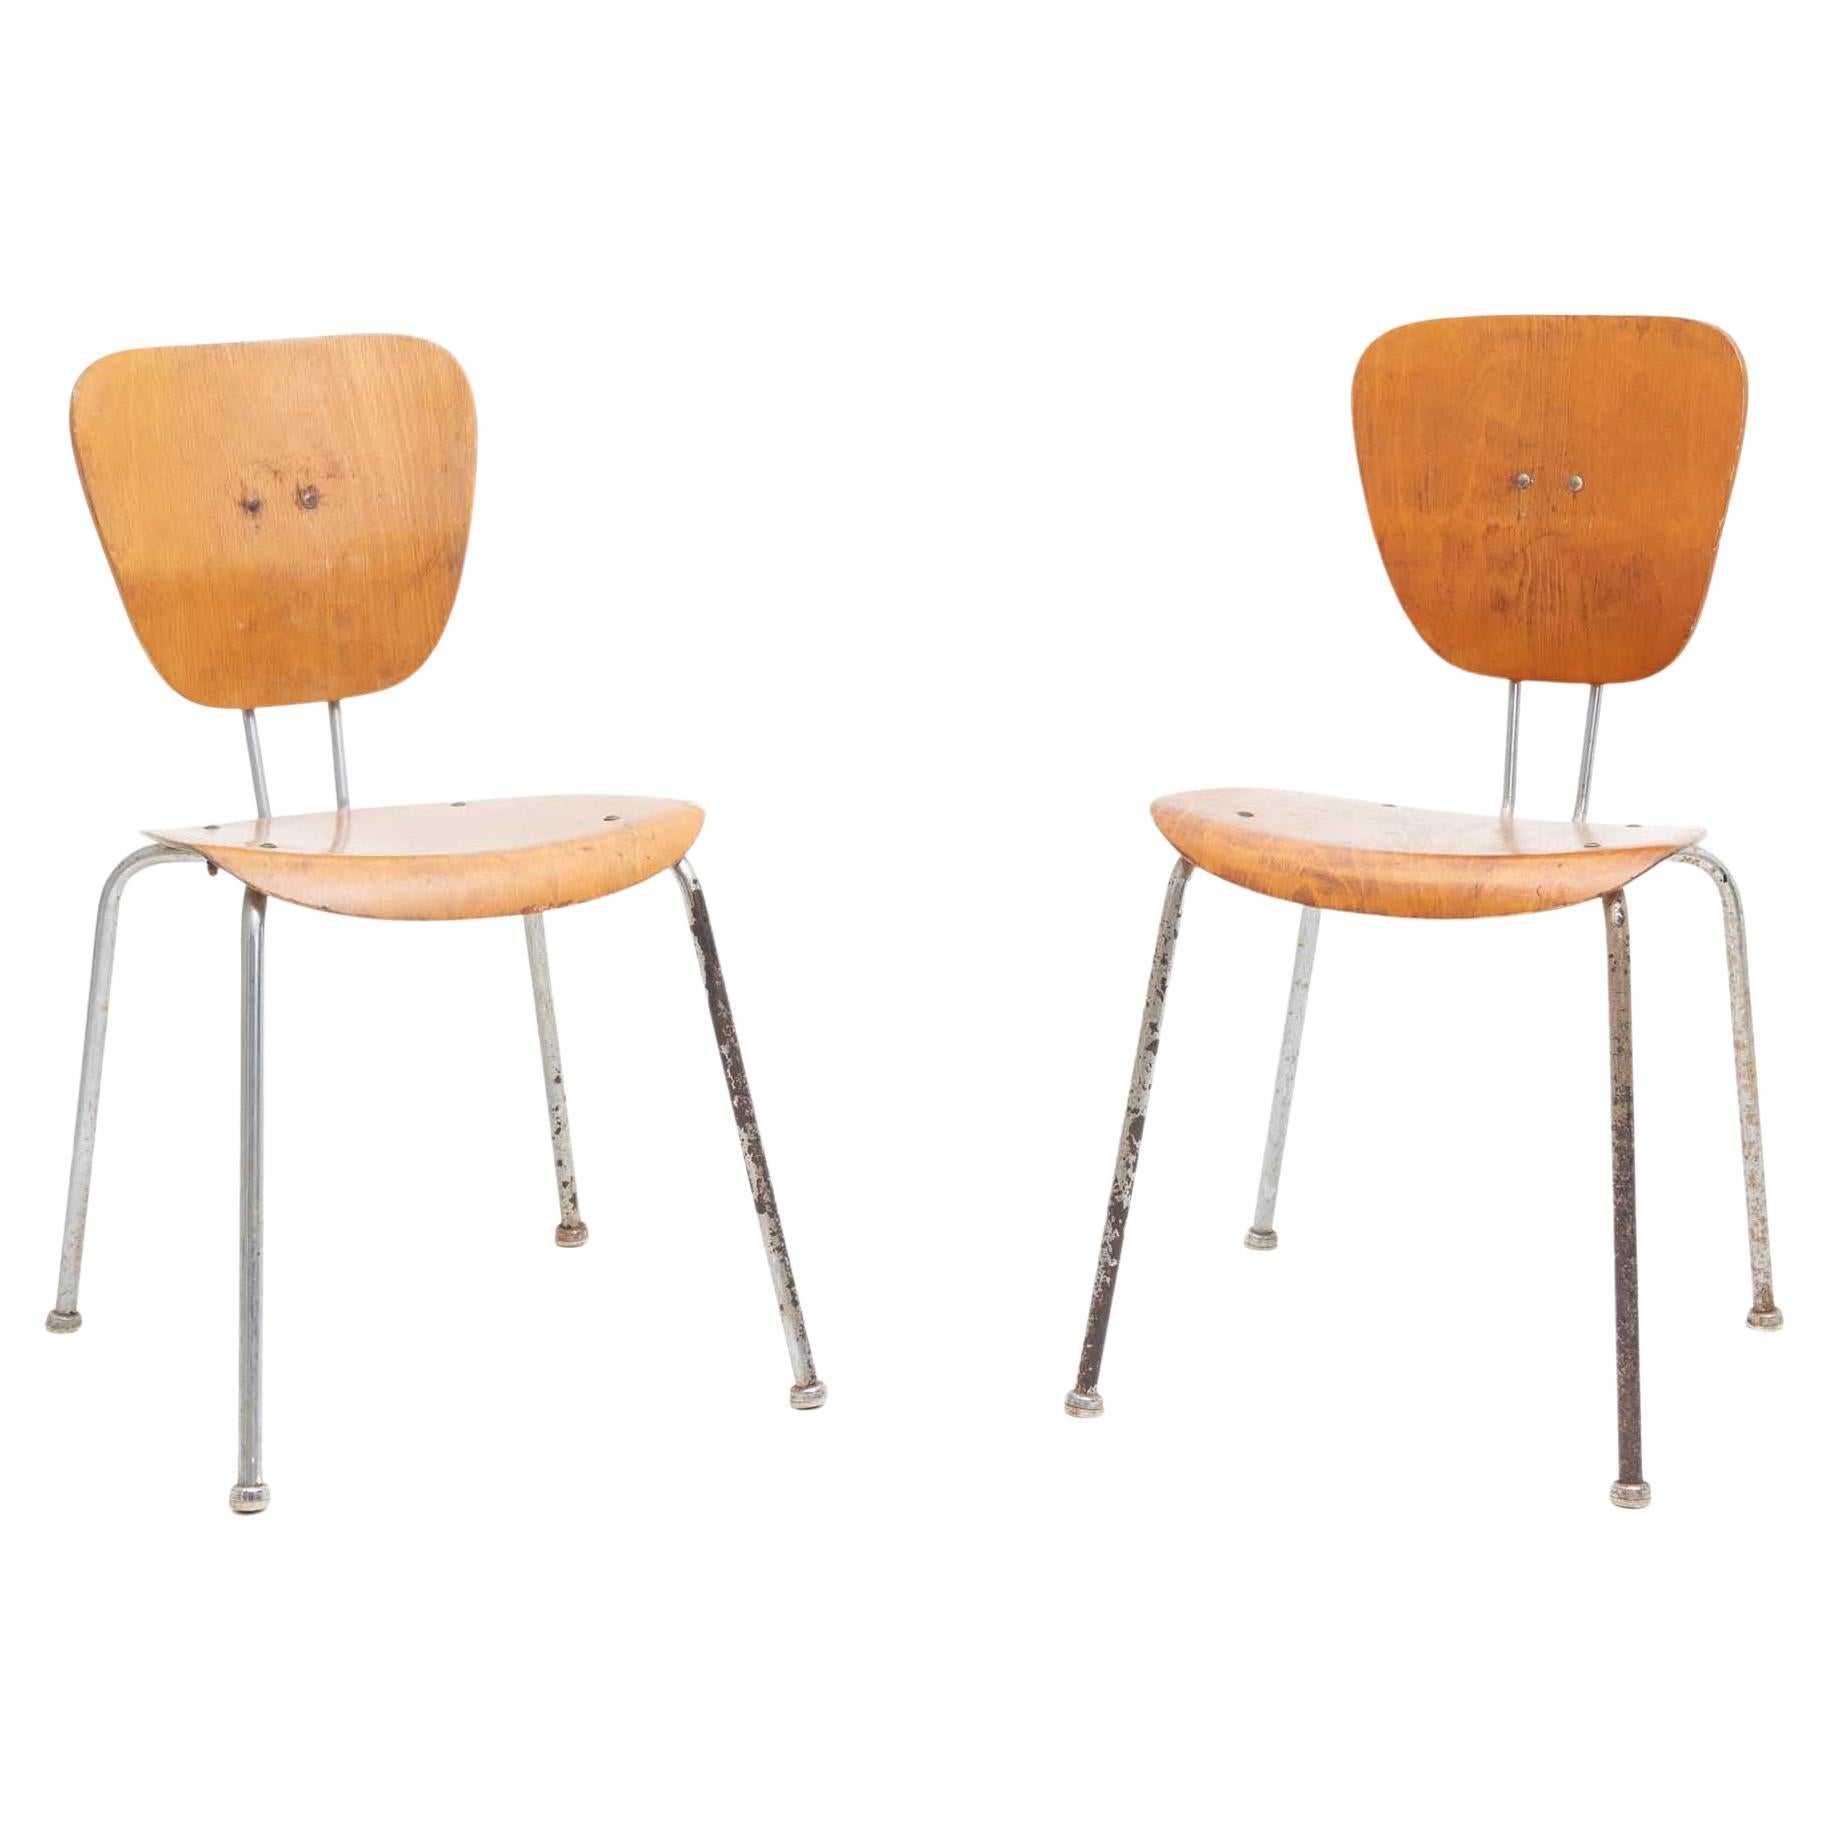 Chairs in the Style of Egon Eiermann, probably Mid-20th Century For Sale